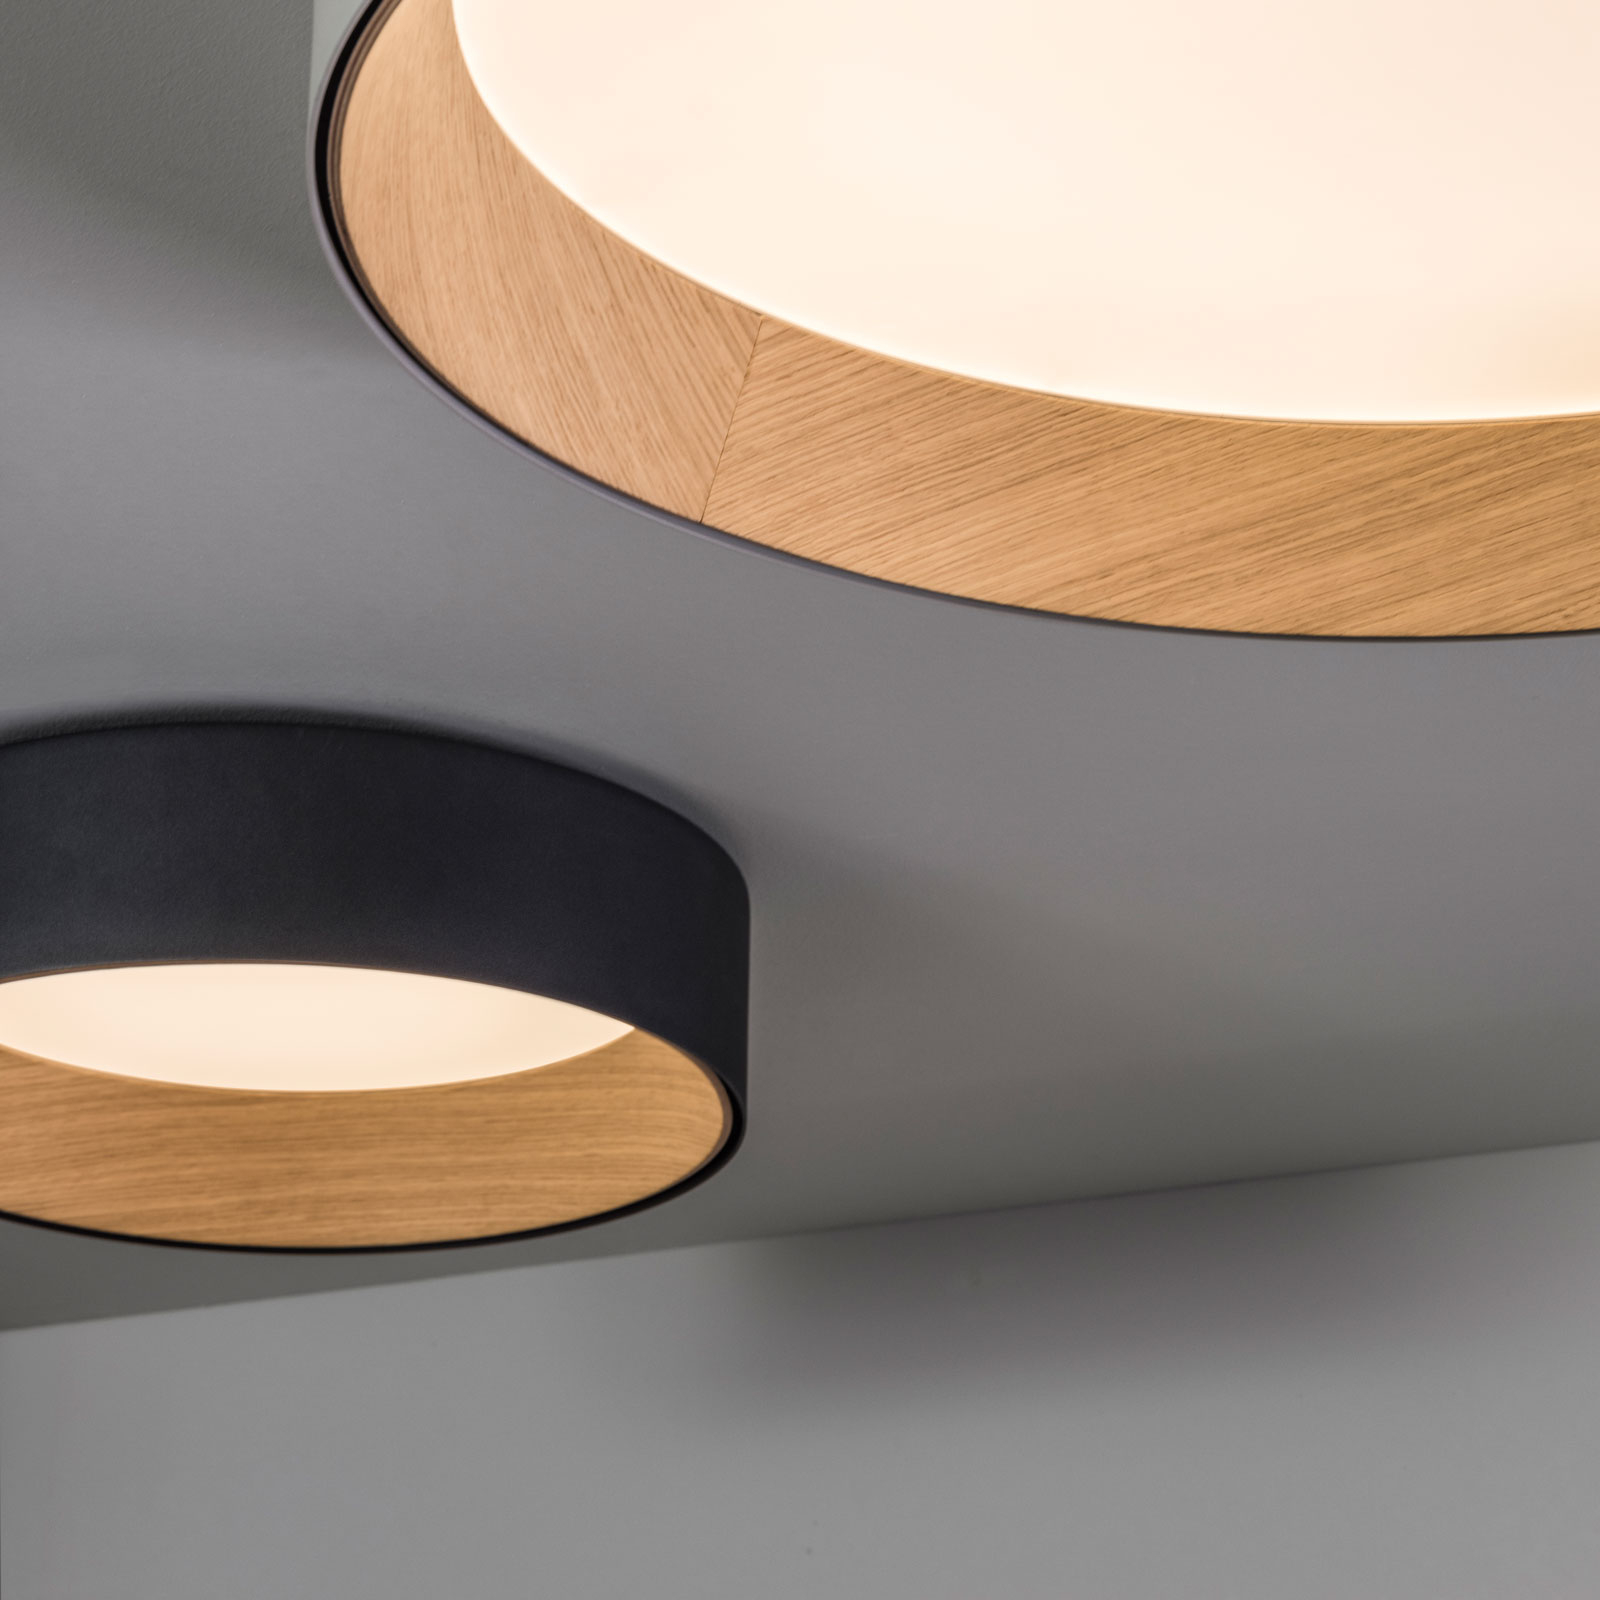 Vibia Duo 4870 LED-taklampe, grå